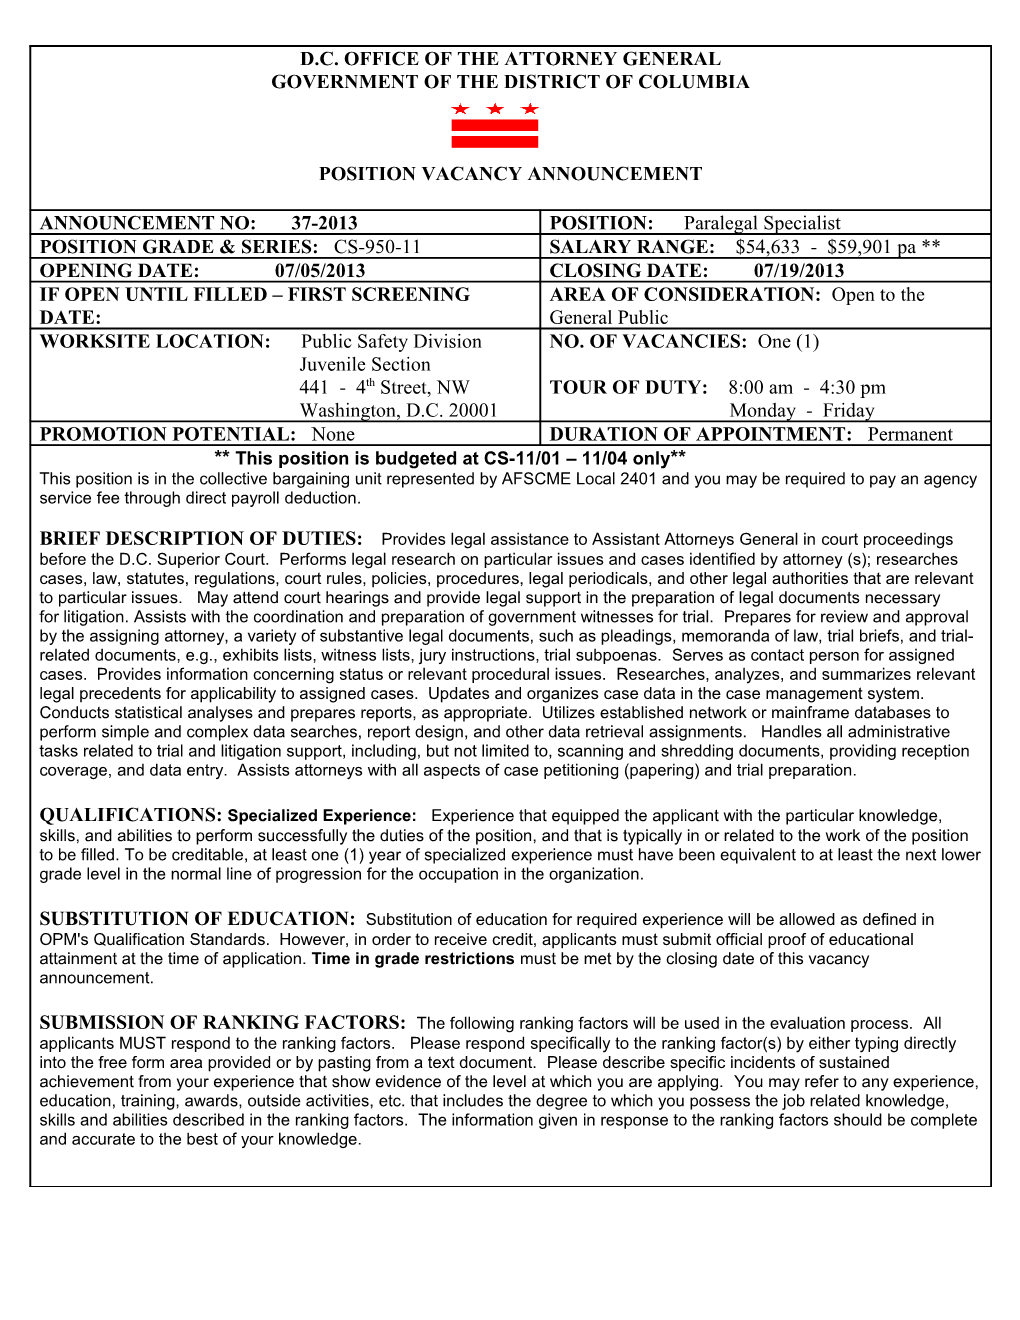 D.C. Office of the Attorney General Government of the District of Columbia Position Vacancy